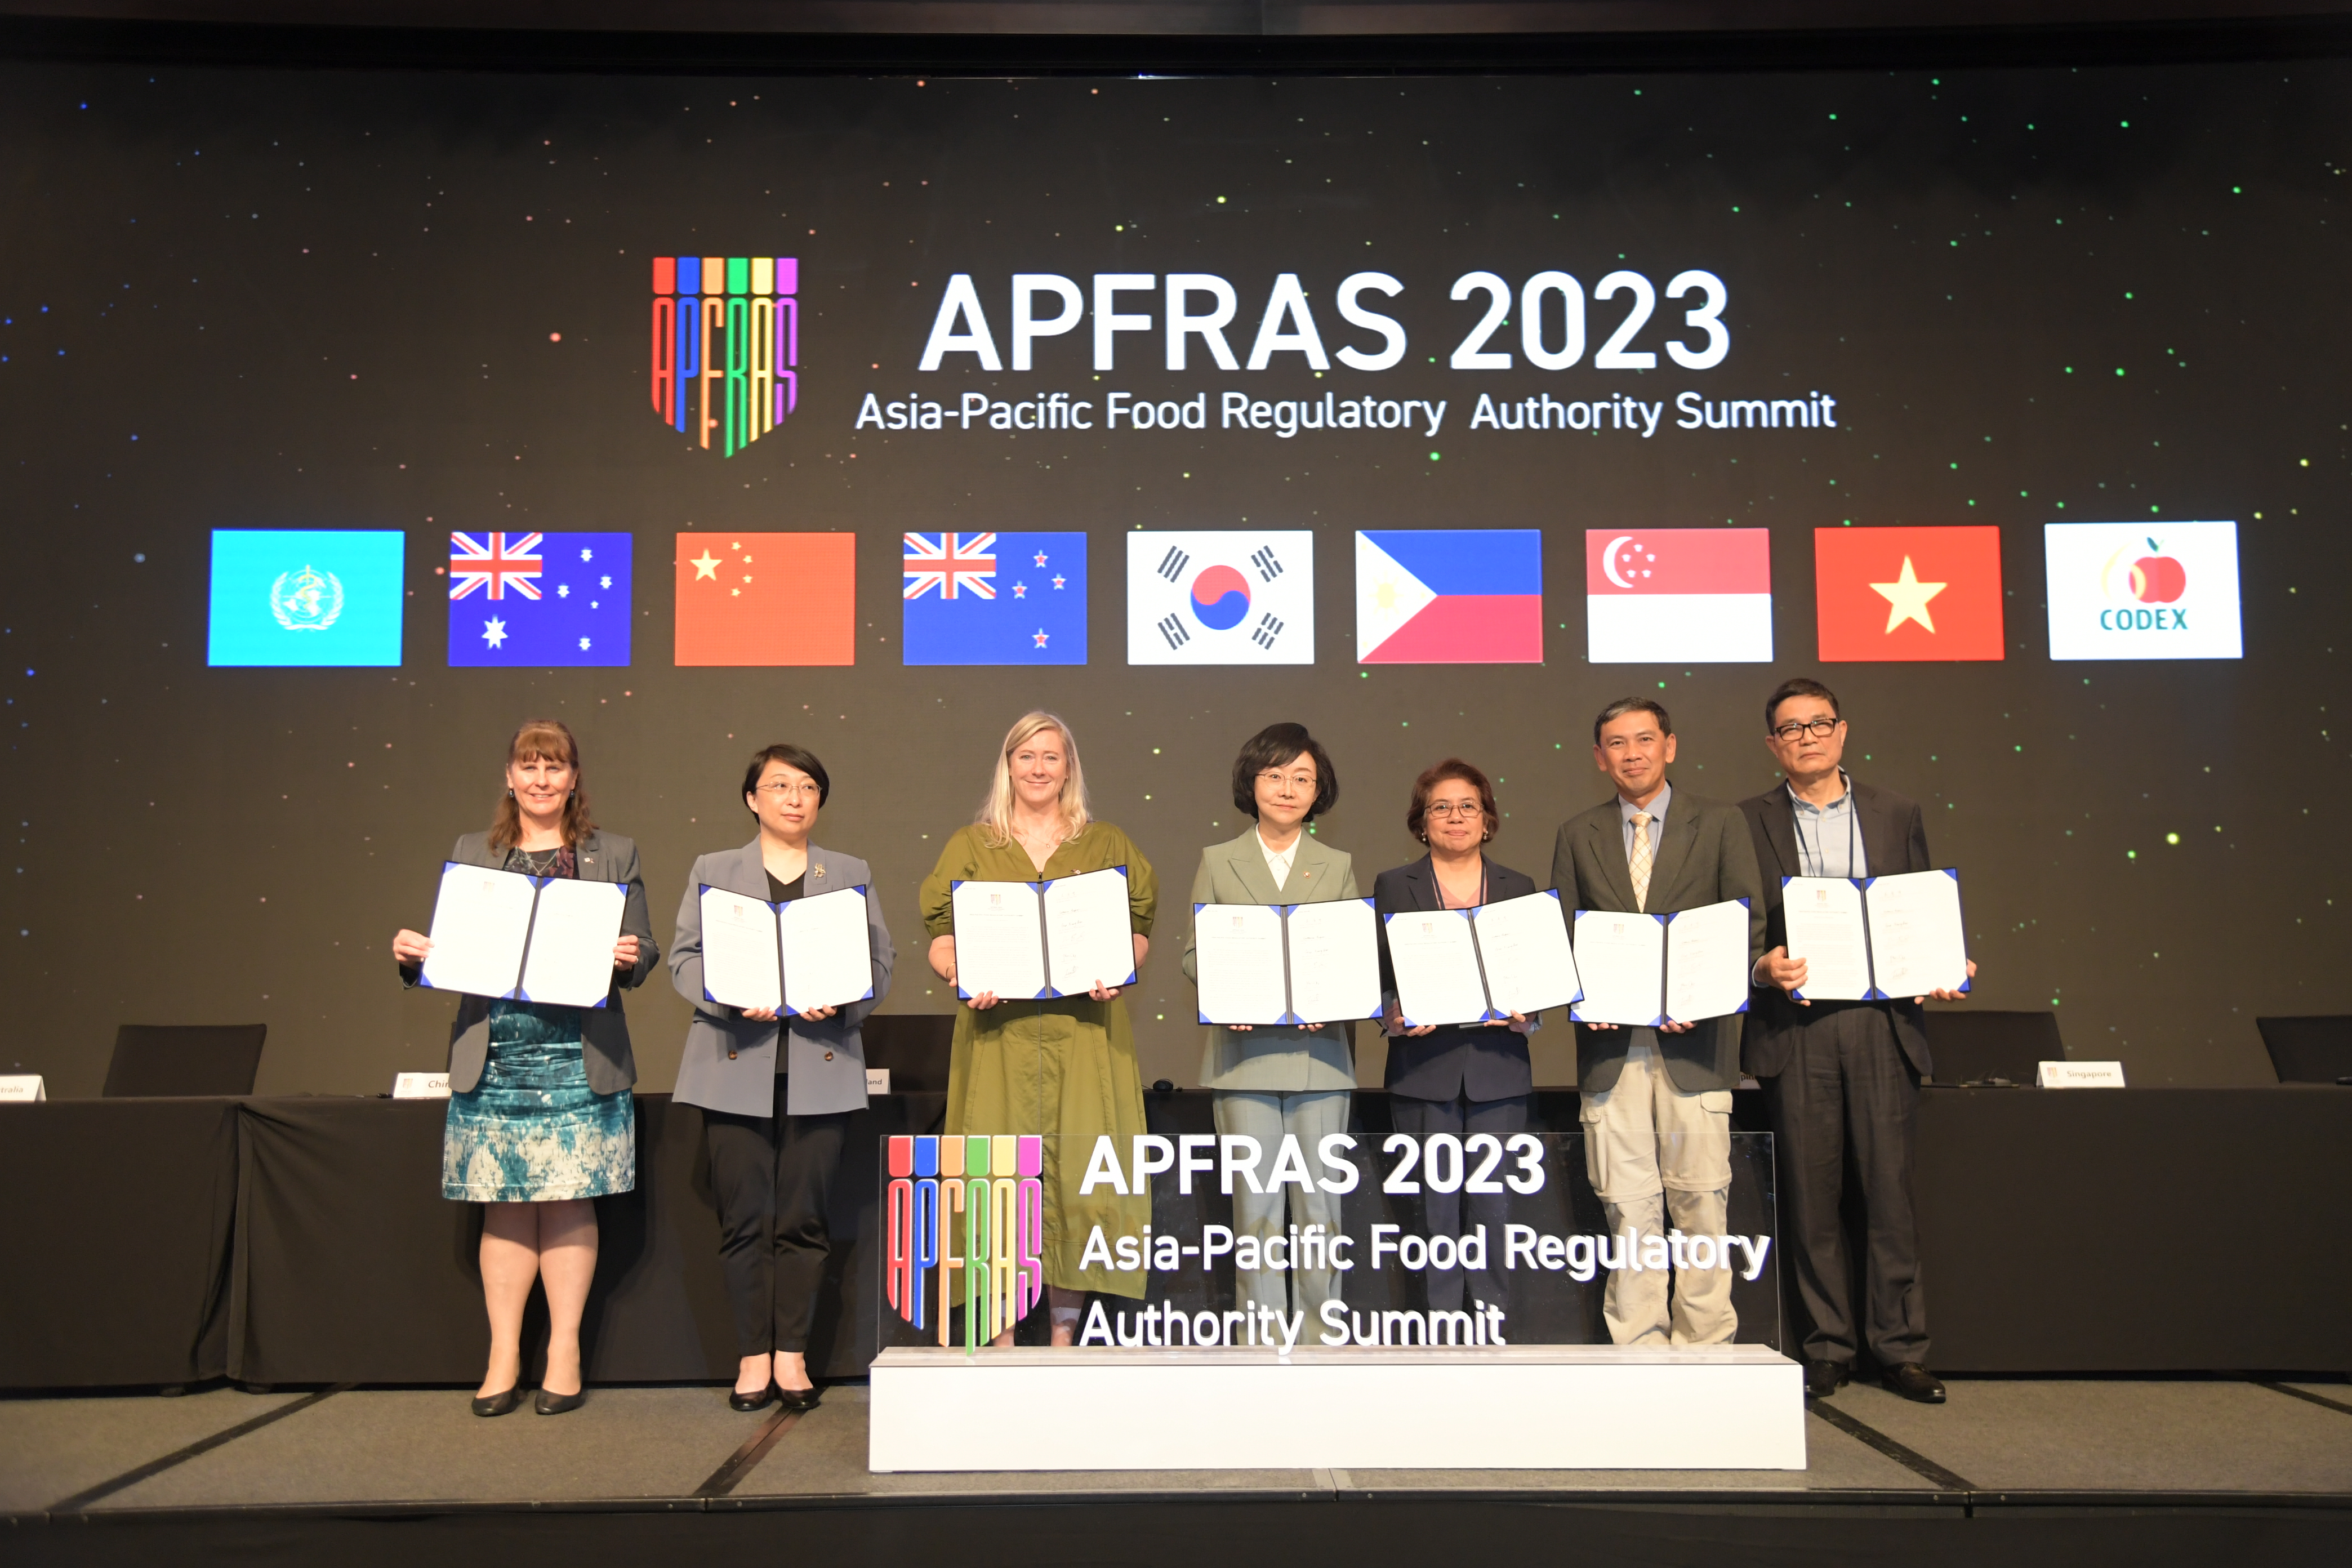 Photo News4 - [May 11, 2023] Minister Attends First Asia-Pacific Food Regulatory Authority Summit (APFRAS 2023) 